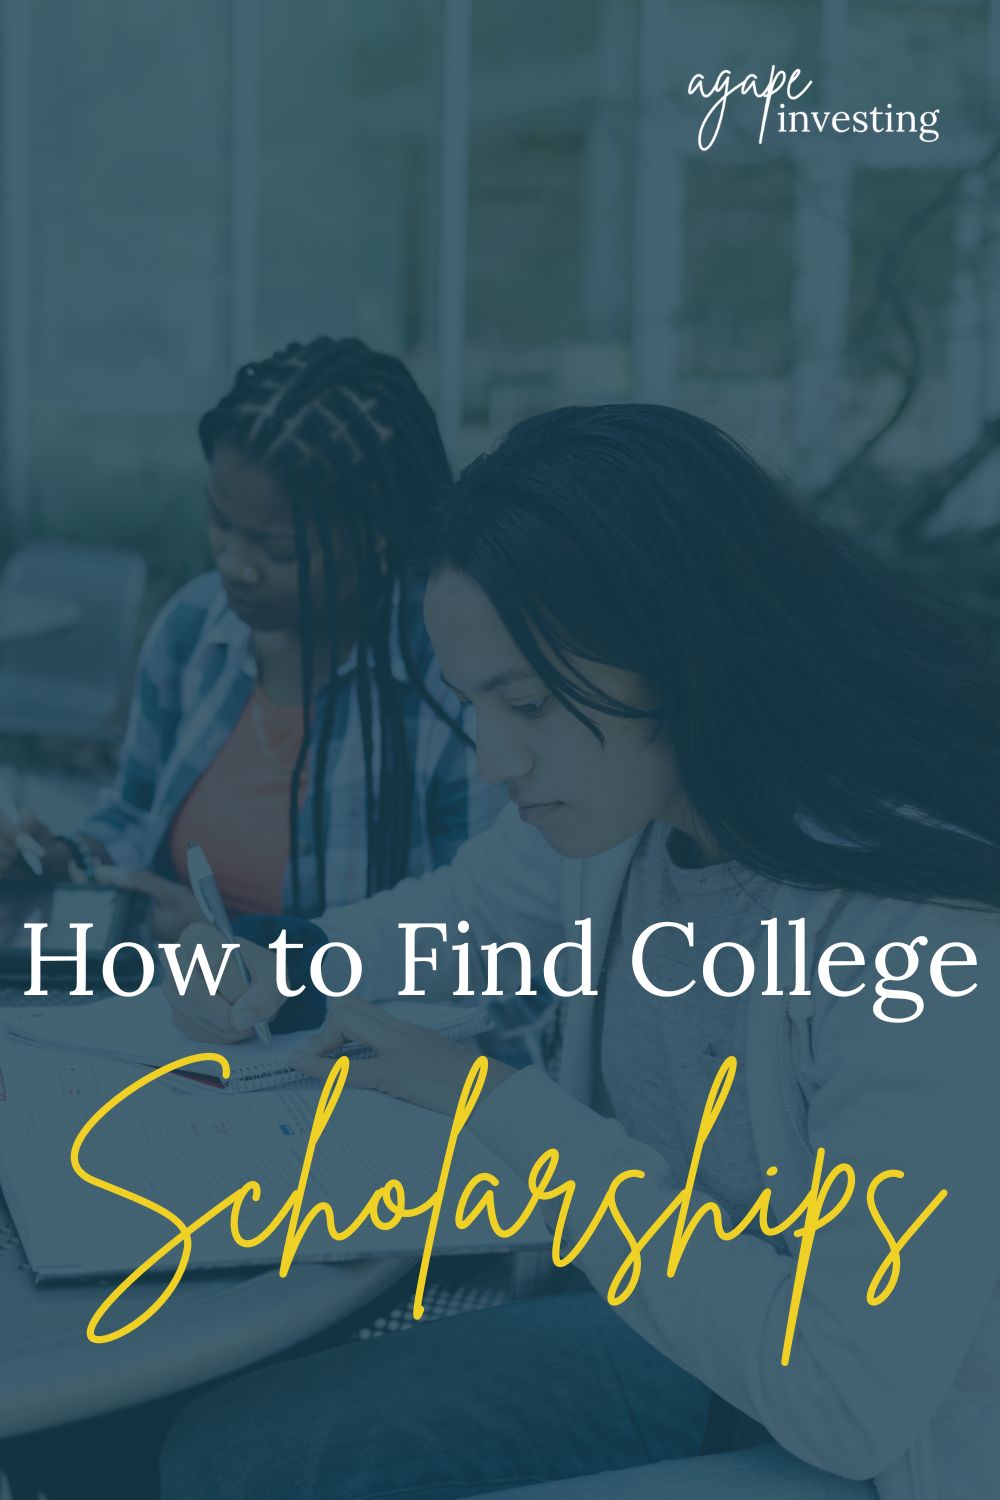 Scholarships can help cover various expenses, including tuition, books, housing, and more. In this article you will learn how to find college scholarships. 